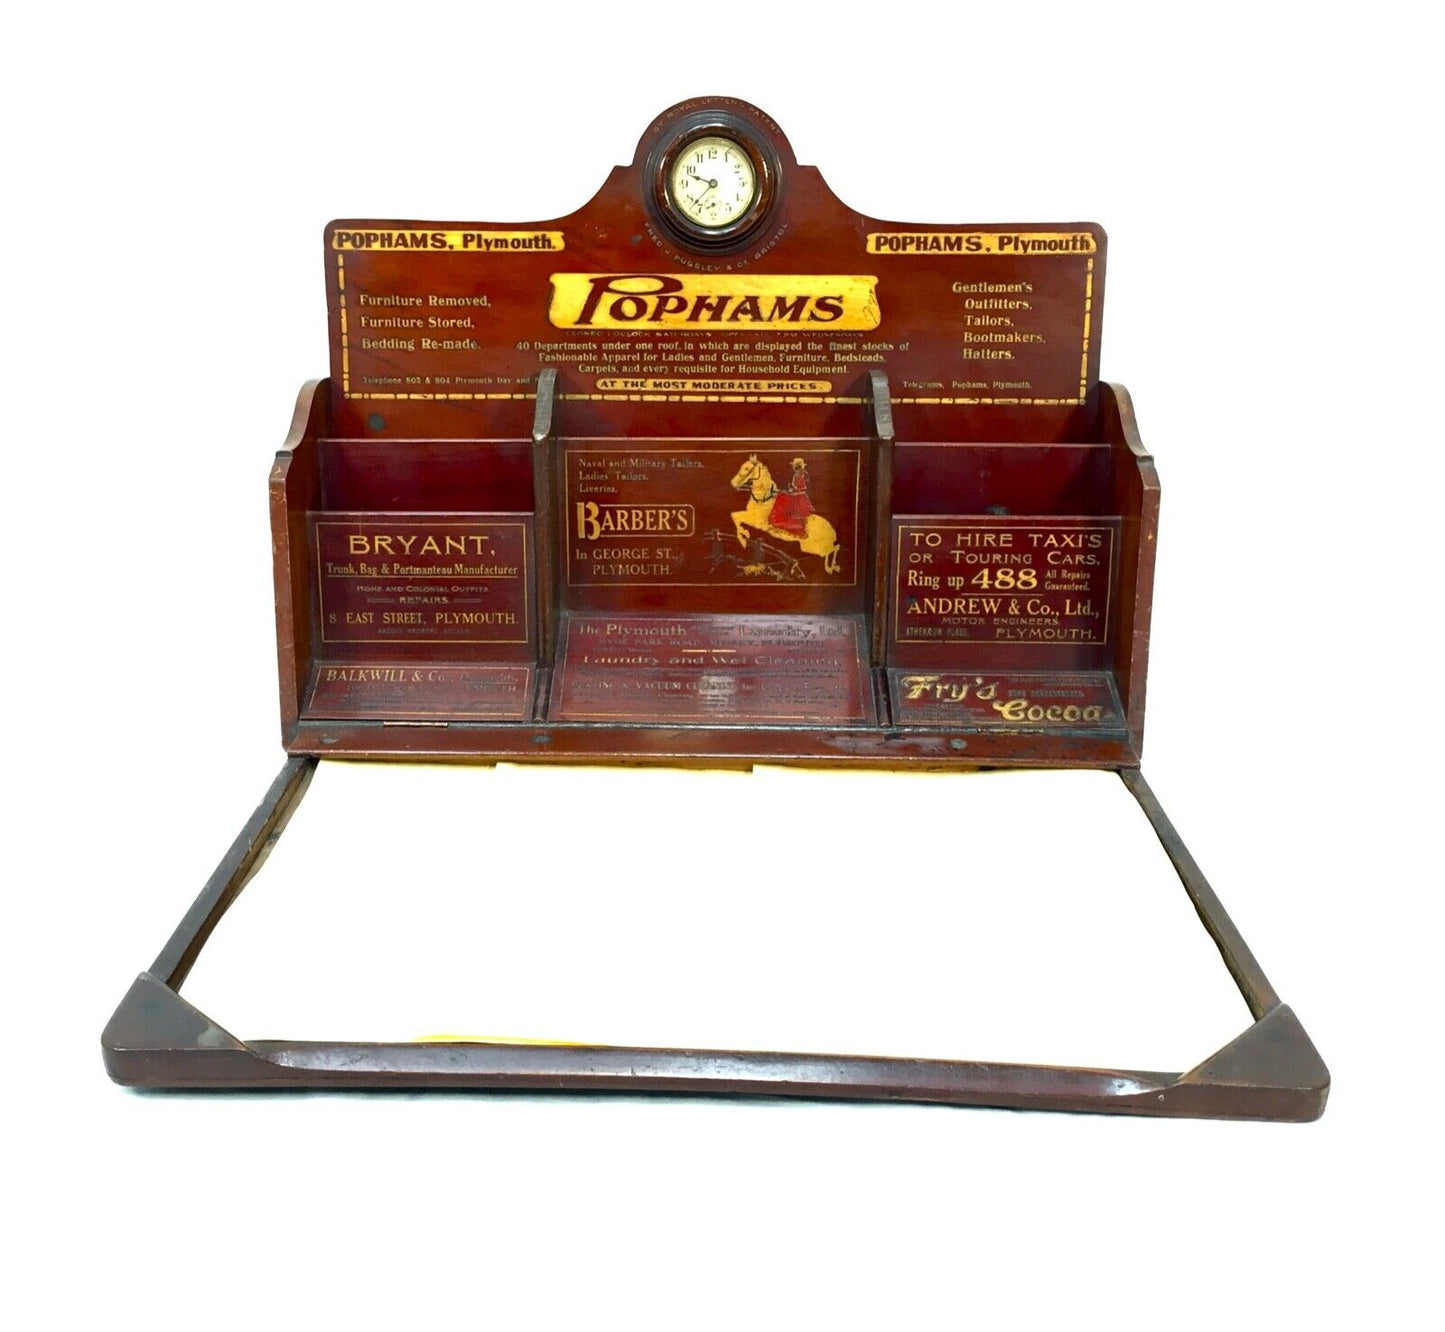 Antique Advertising - Pophams Plymouth Shop Display Sign / Stationery Cabinet